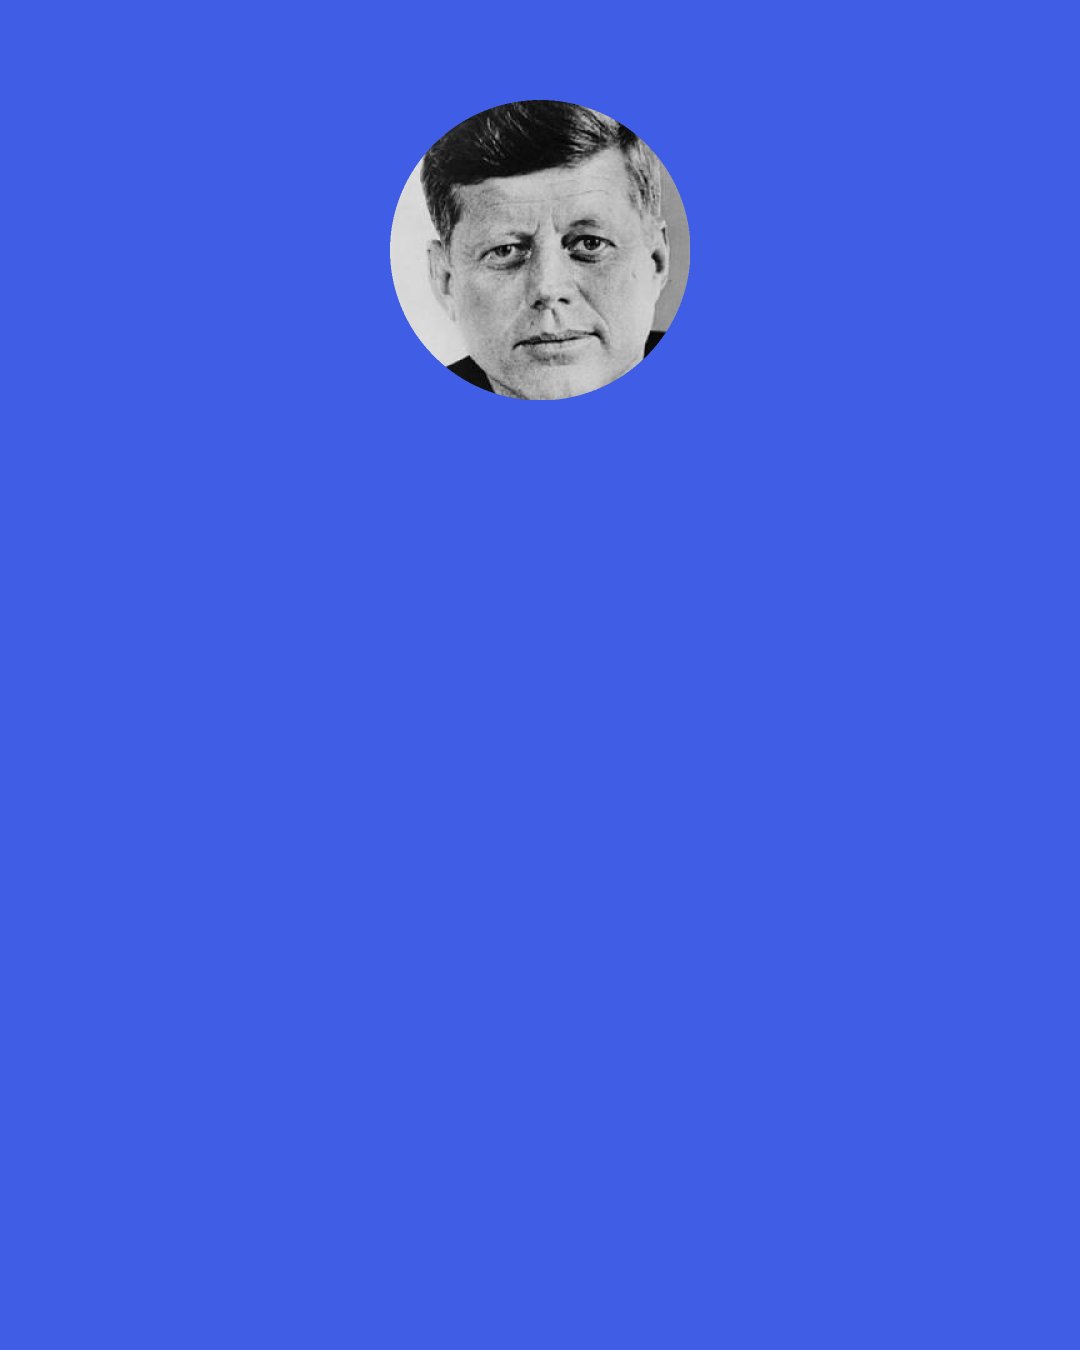 John F. Kennedy: And is not peace, in the last analysis, basically a matter of human rights -- the right to live out our lives without fear of devastation – the right to breathe air as nature provided it -- the right of future generations to a healthy existence?" (John F. Kennedy, June 10, 1963, American University speech)